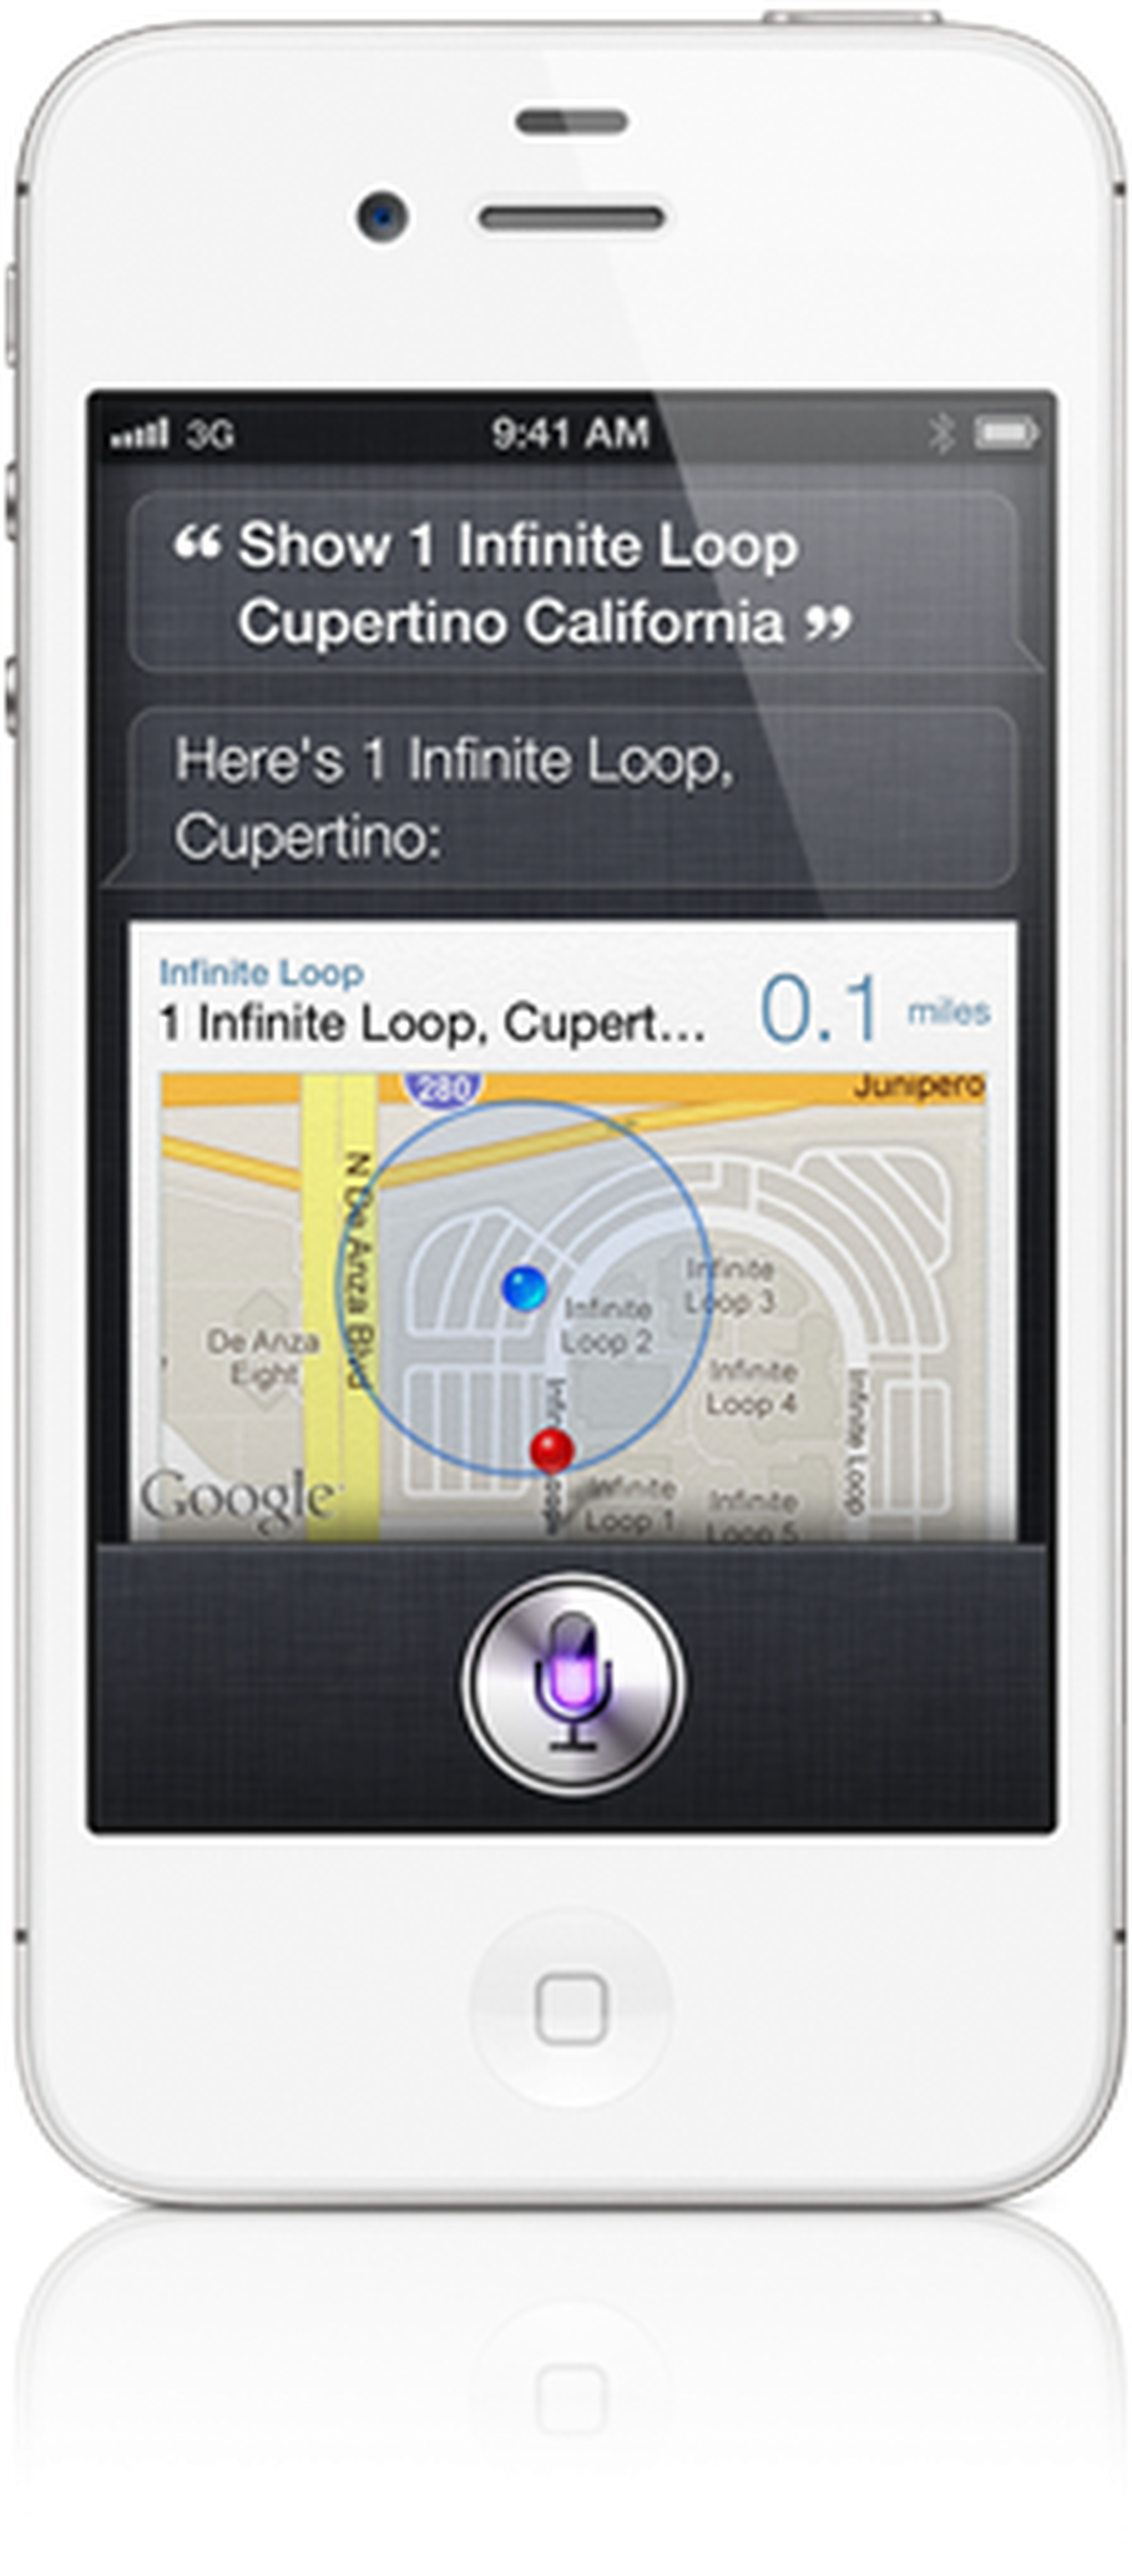 iOS 5 includes Siri ‘intelligent assistant’ voice-control, dictation — for iPhone 4S only